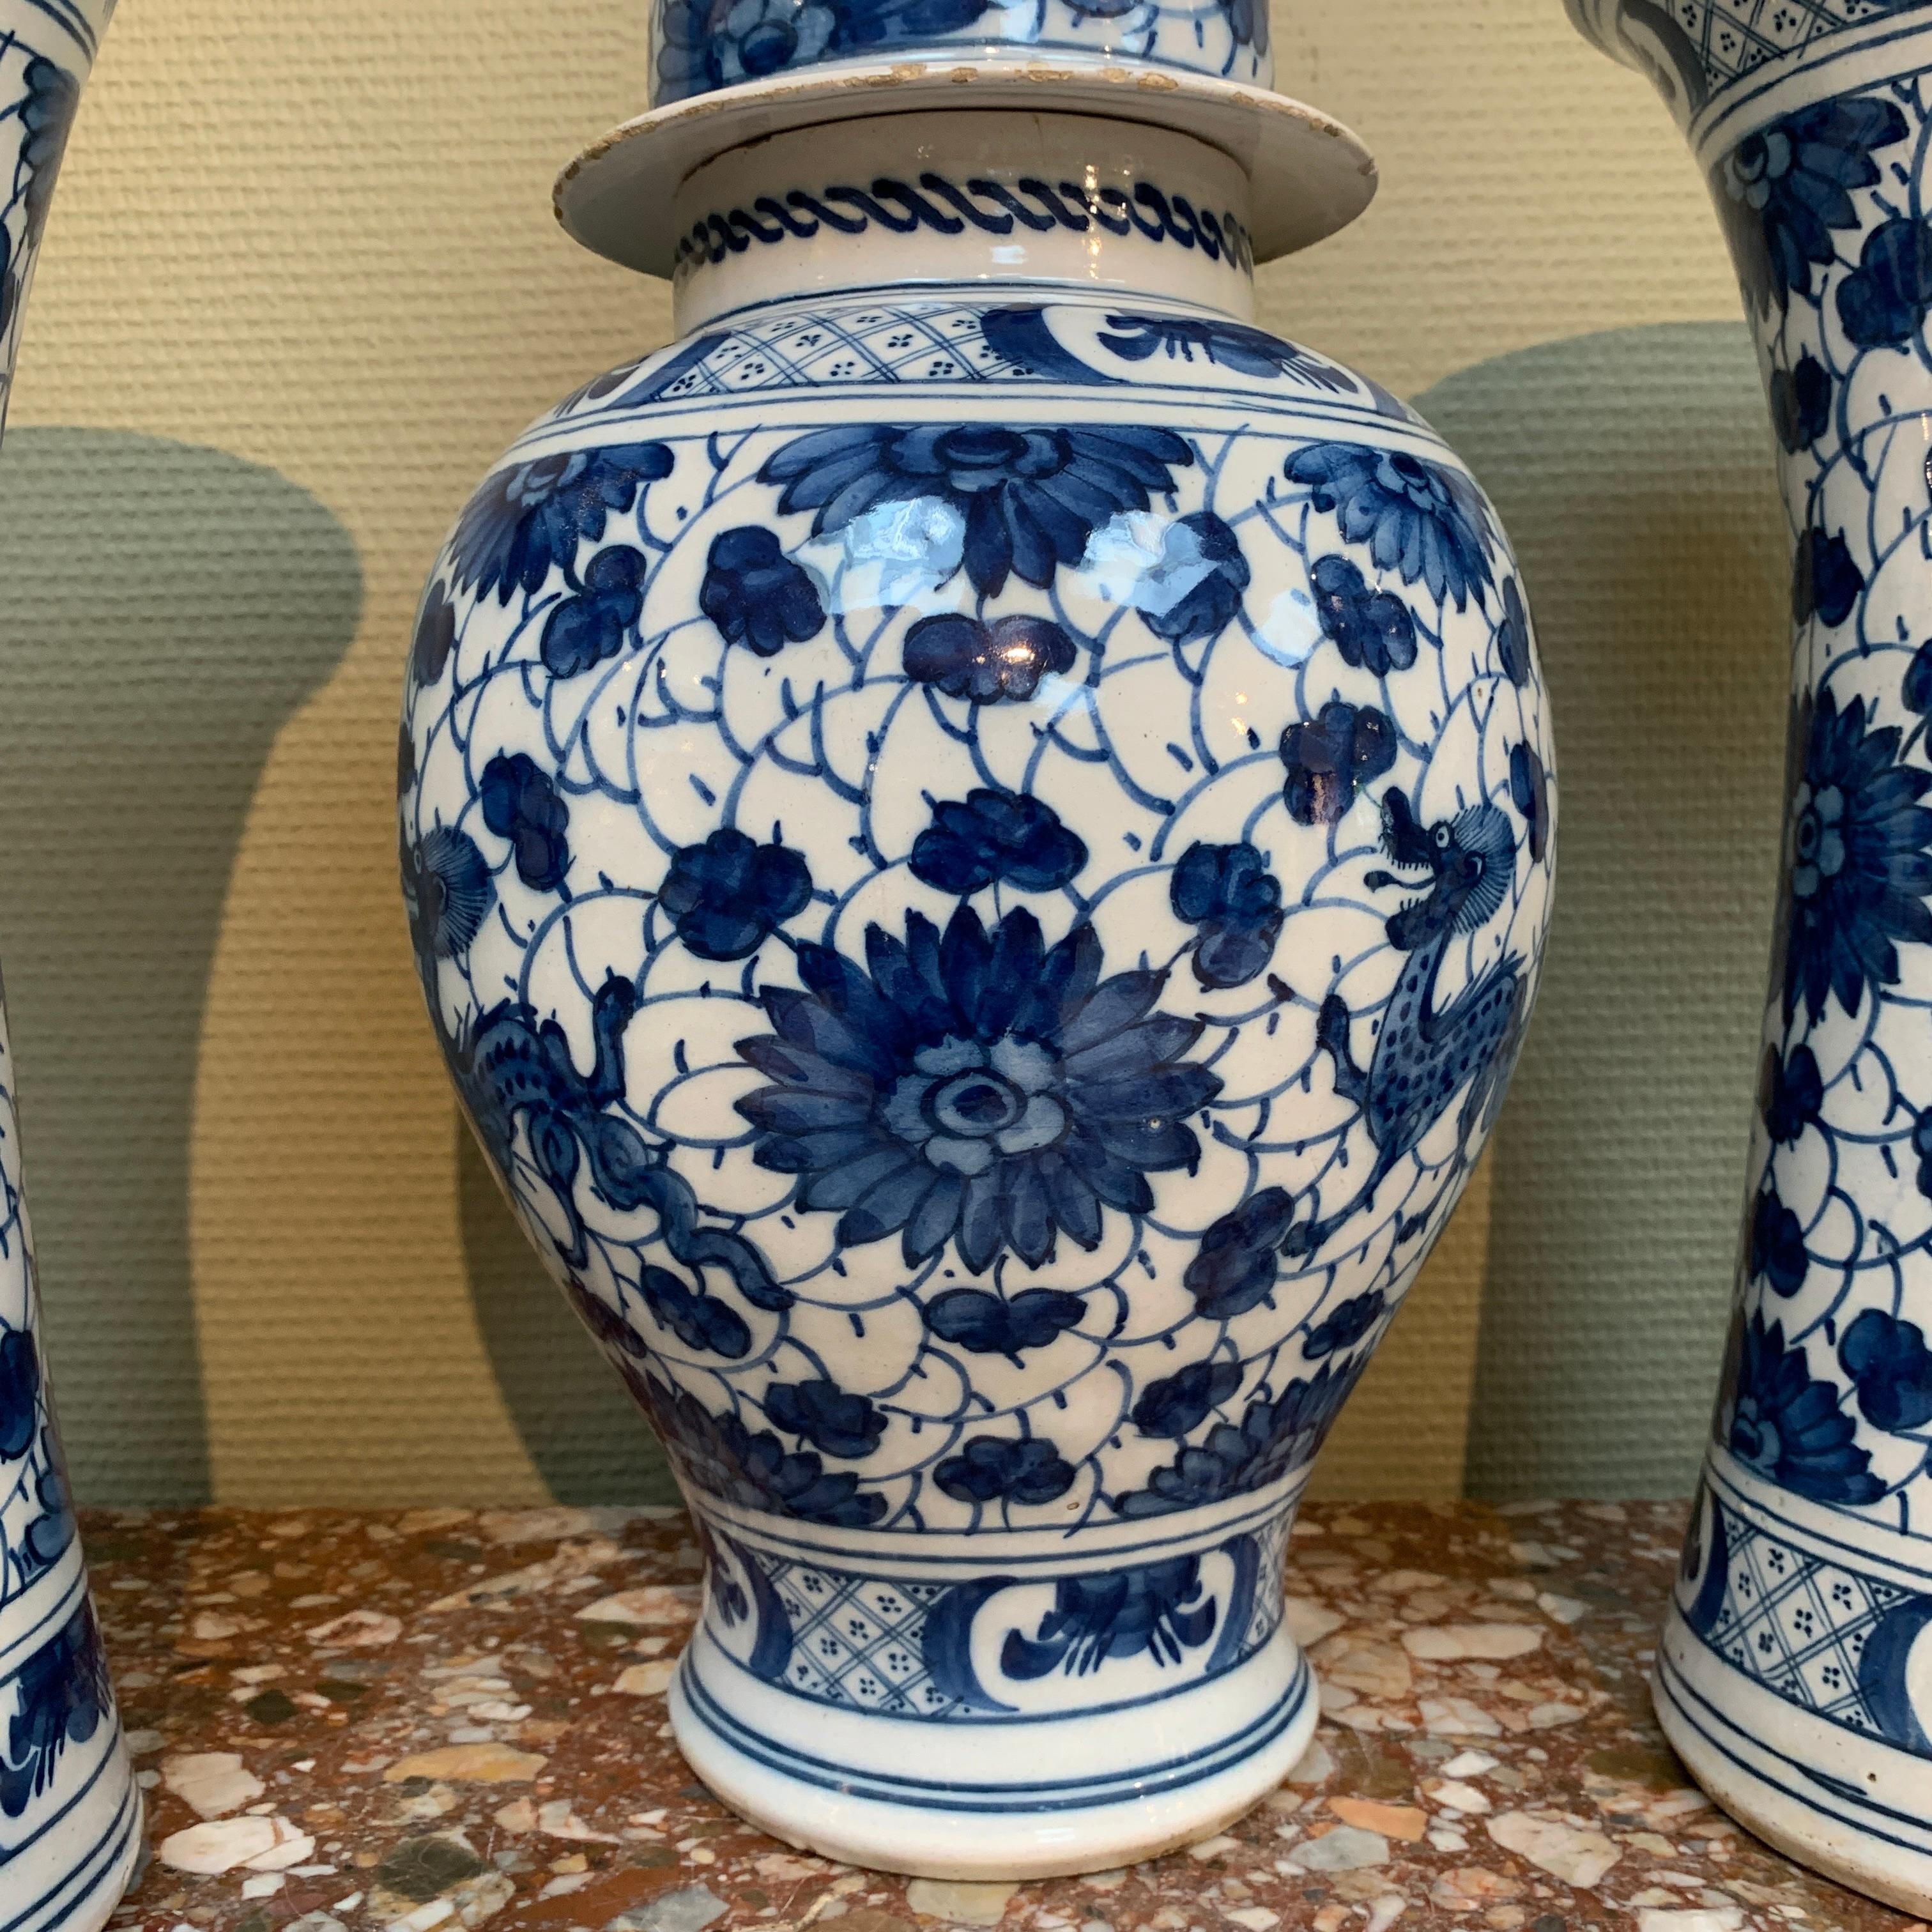 Rare and Large Dutch Delft Dragons Three Piece Garniture Vases Set, Early 18th C 8